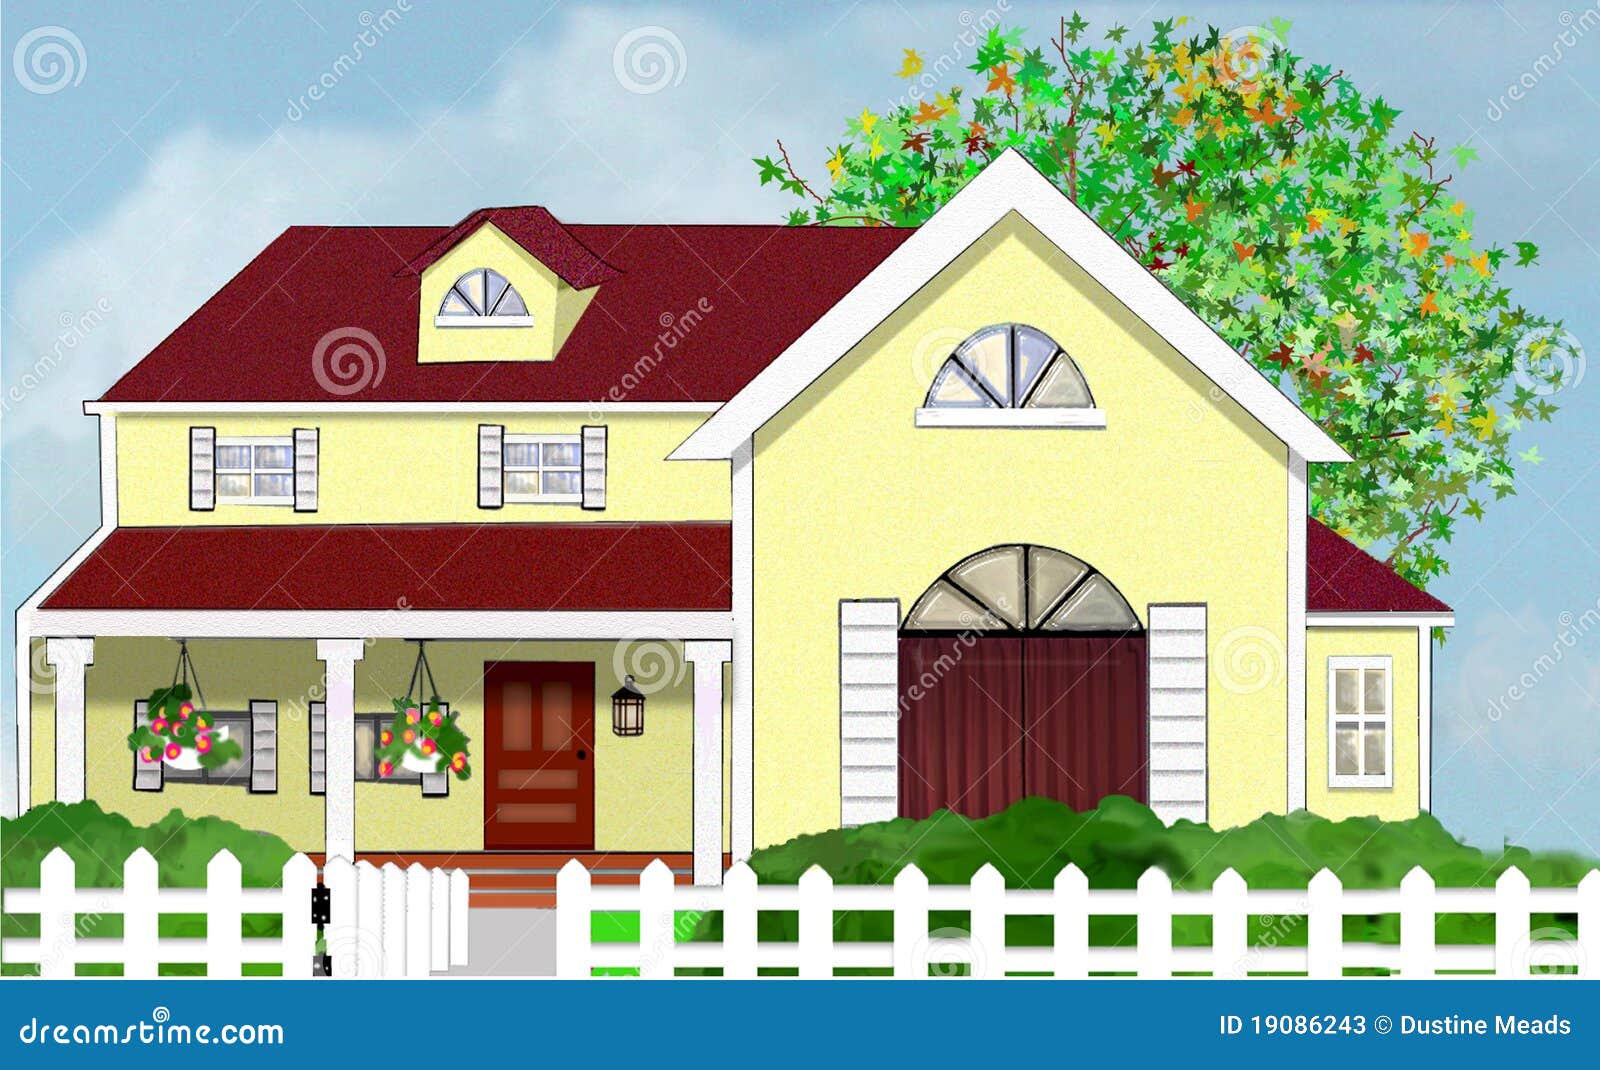 house with fence clip art - photo #23